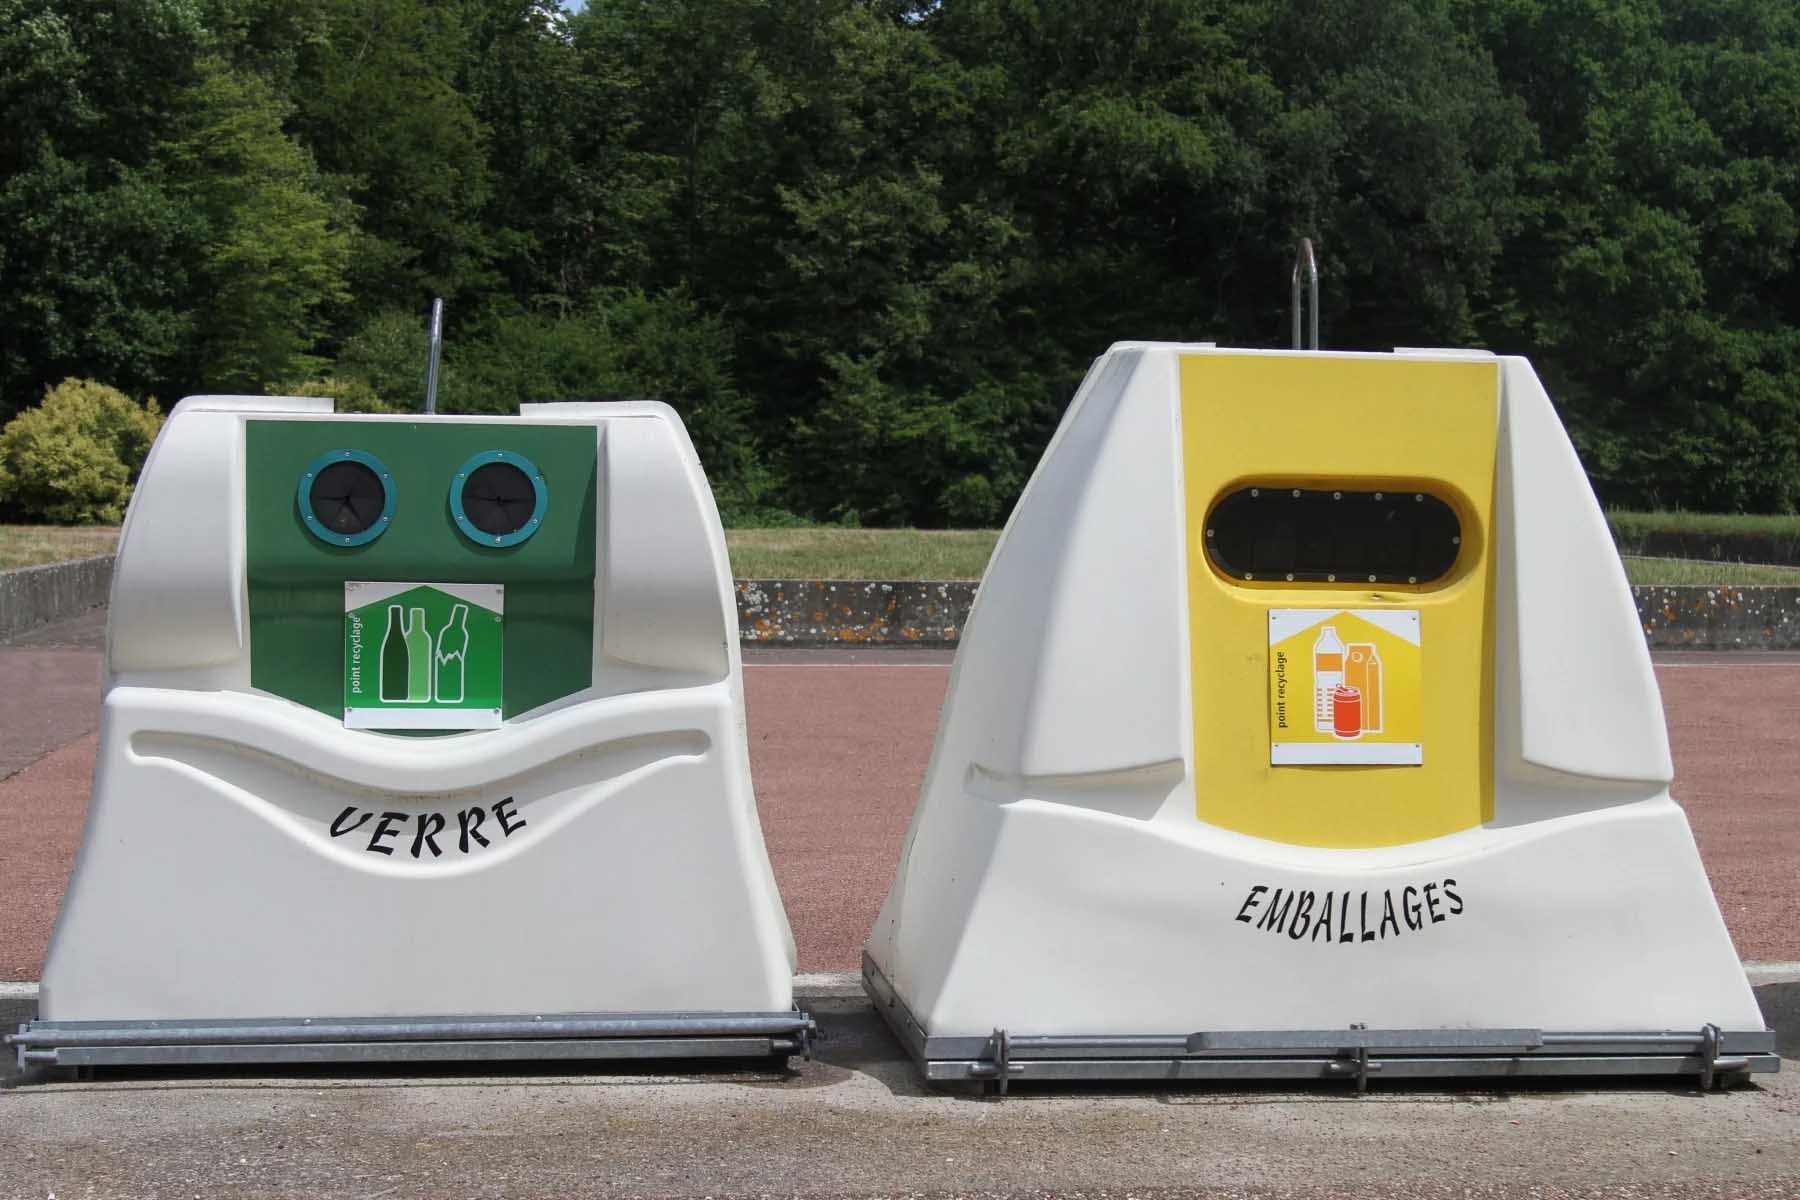 Two unusually shaped recycling bins. They are like malformed triangles. The one on the left has a green label and is for glass. The one on the right has a yellow label and is for packaging.